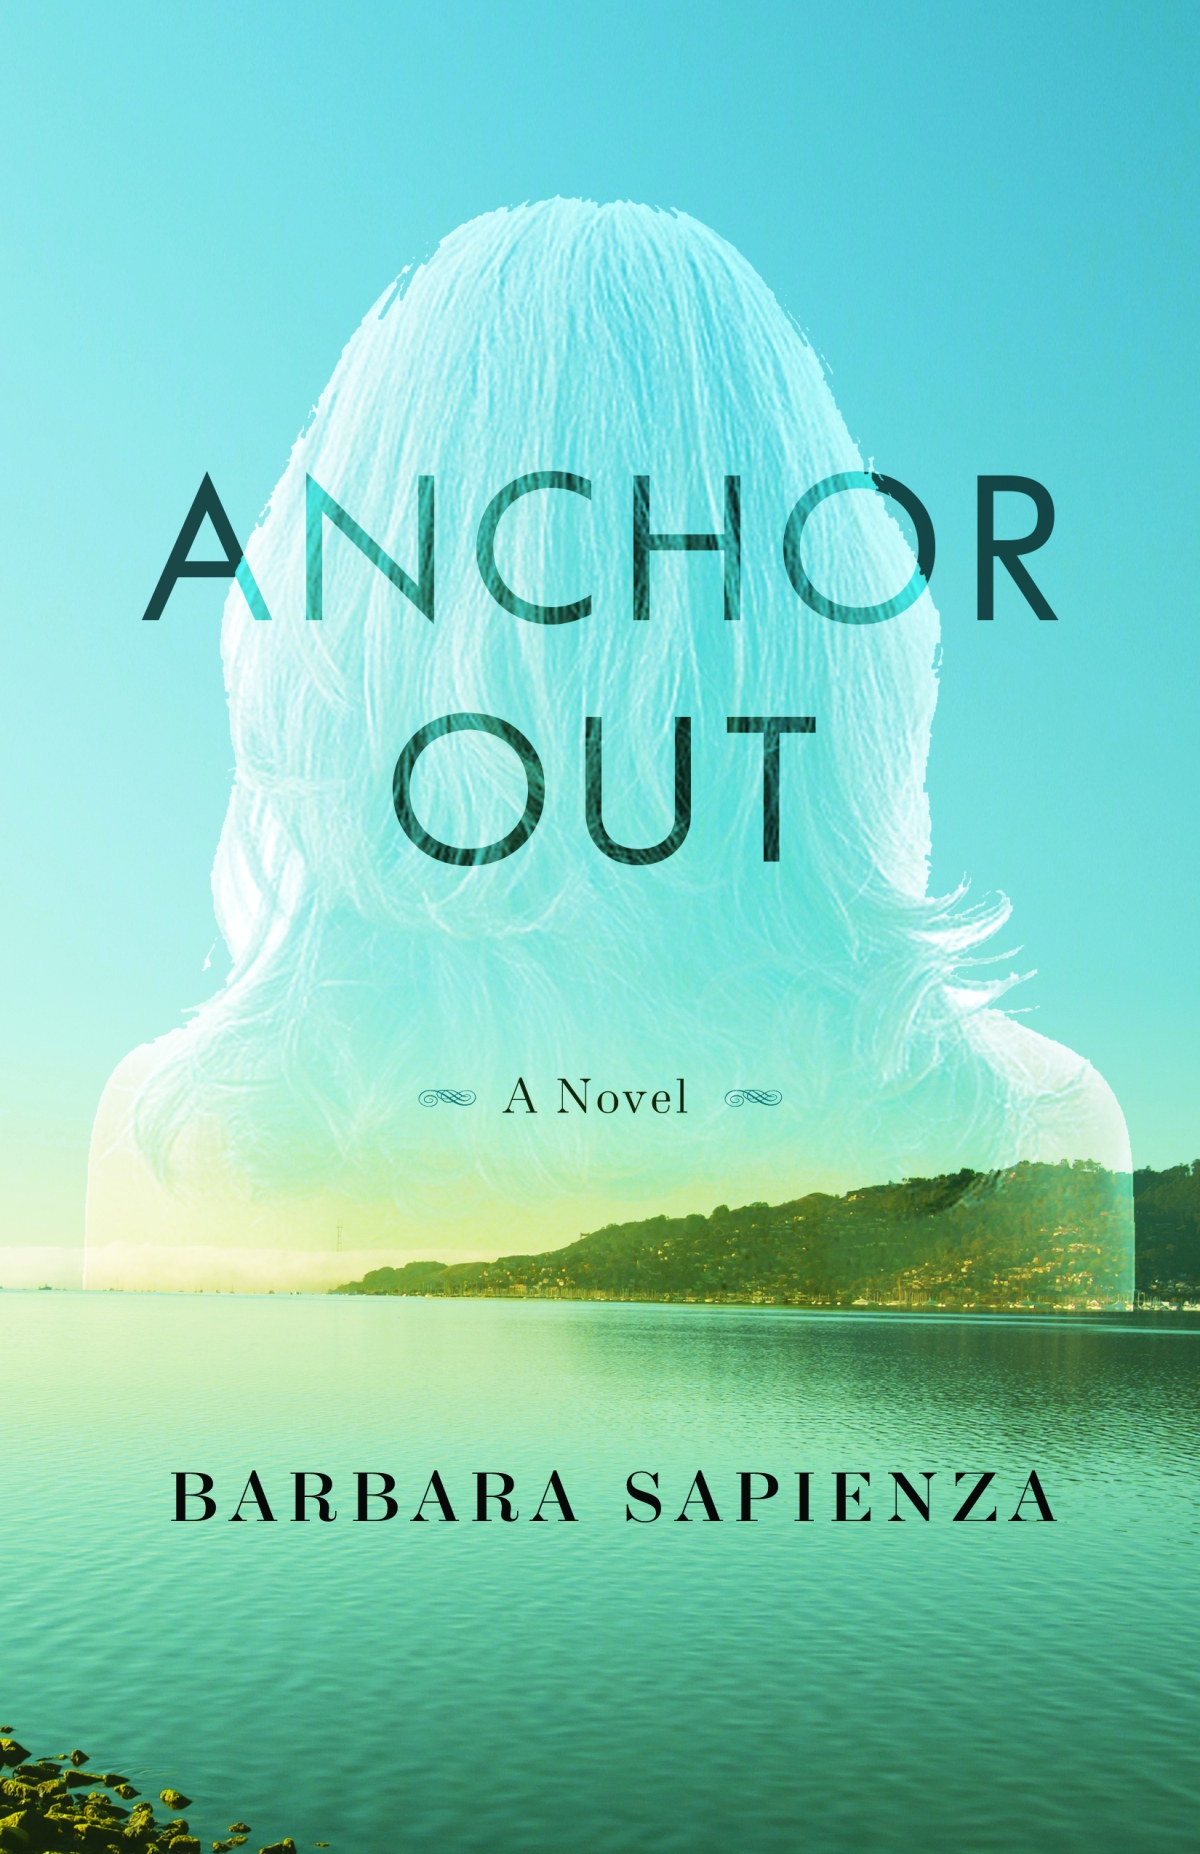 Welcome to Anchor Out, a novel